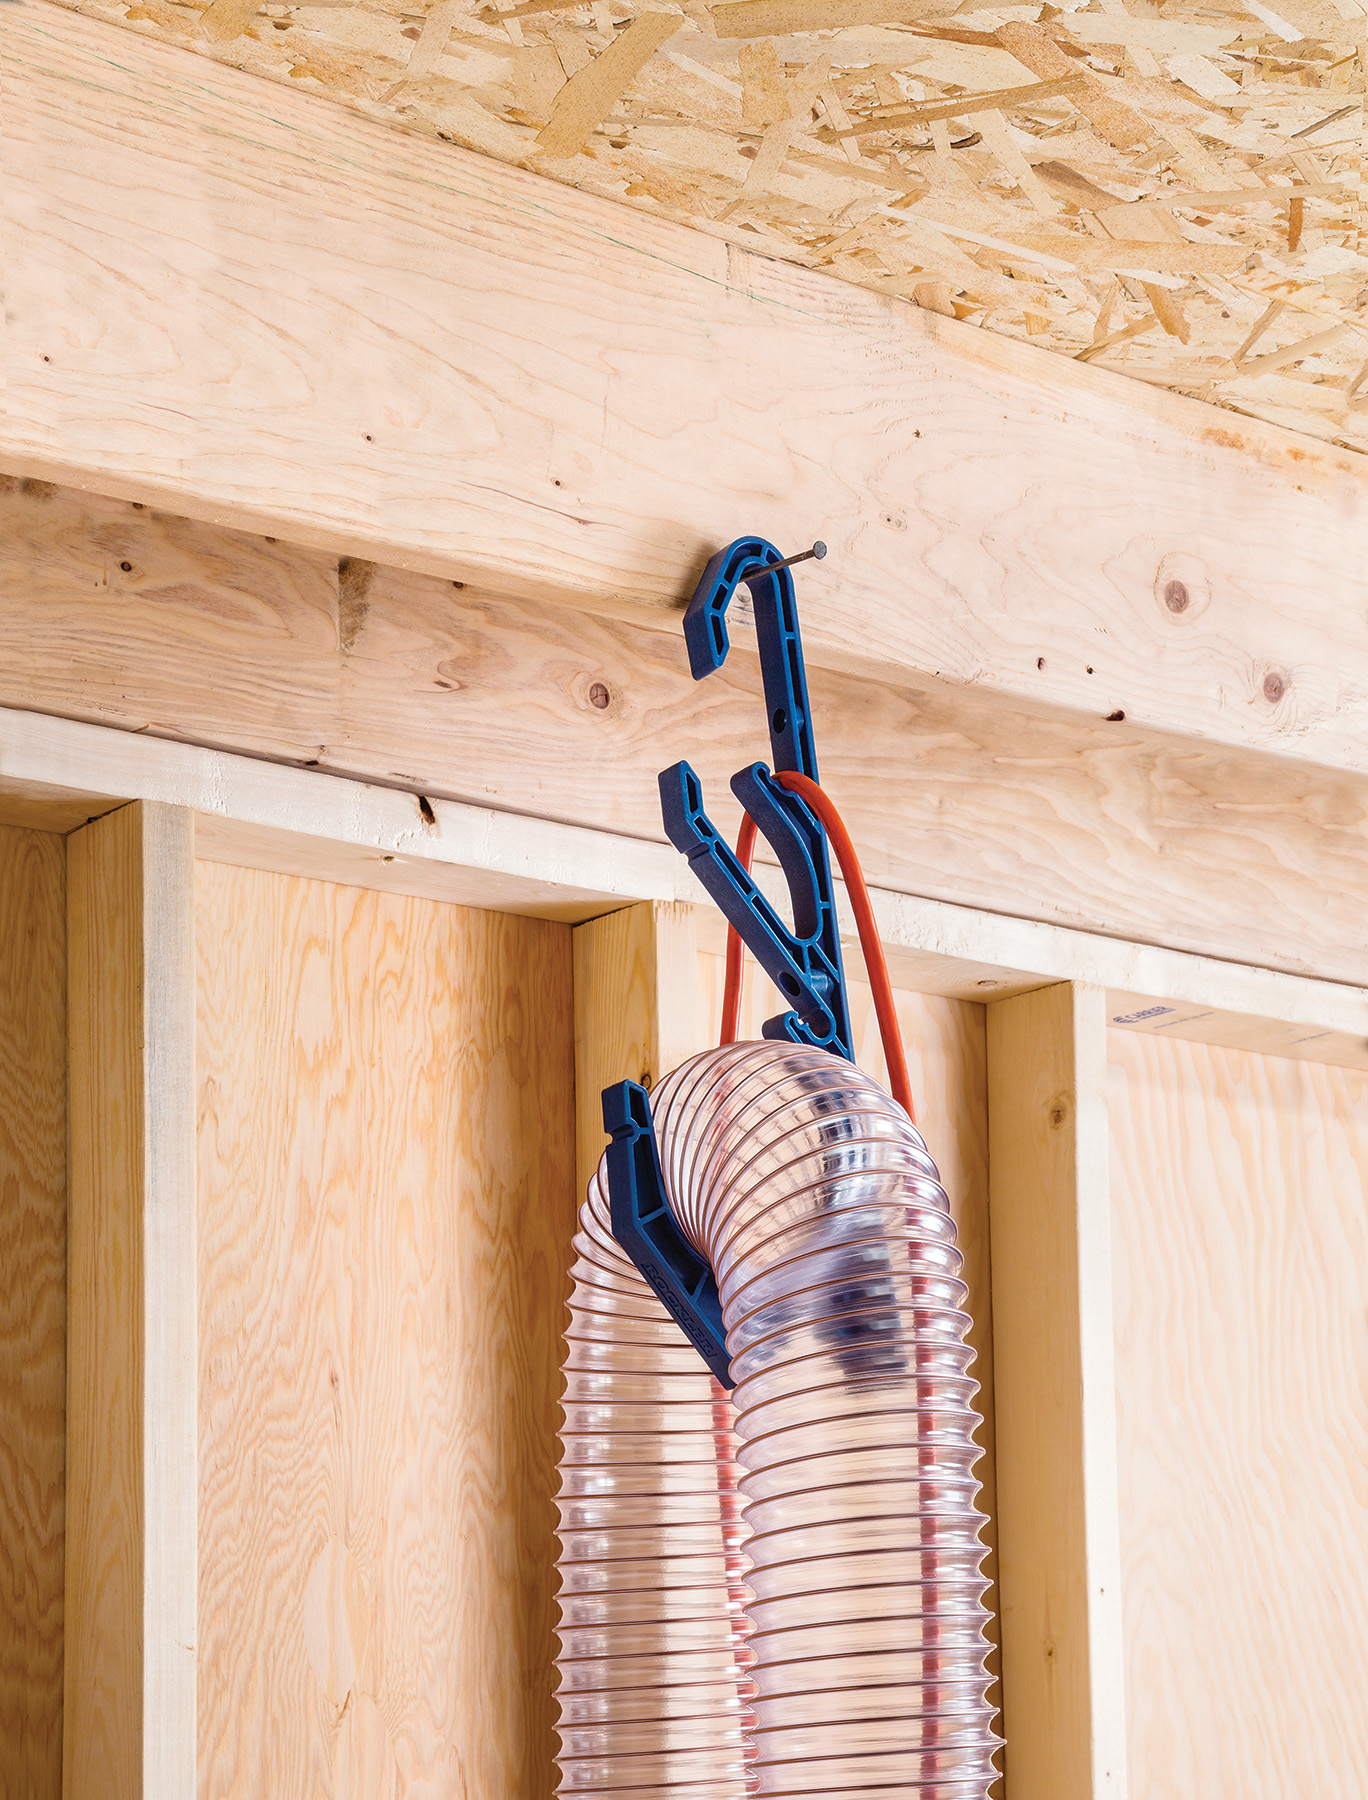 Hang the Dust Right Cord and Hose Hook from a nail or screw for better hose and cord management throughout the shop.